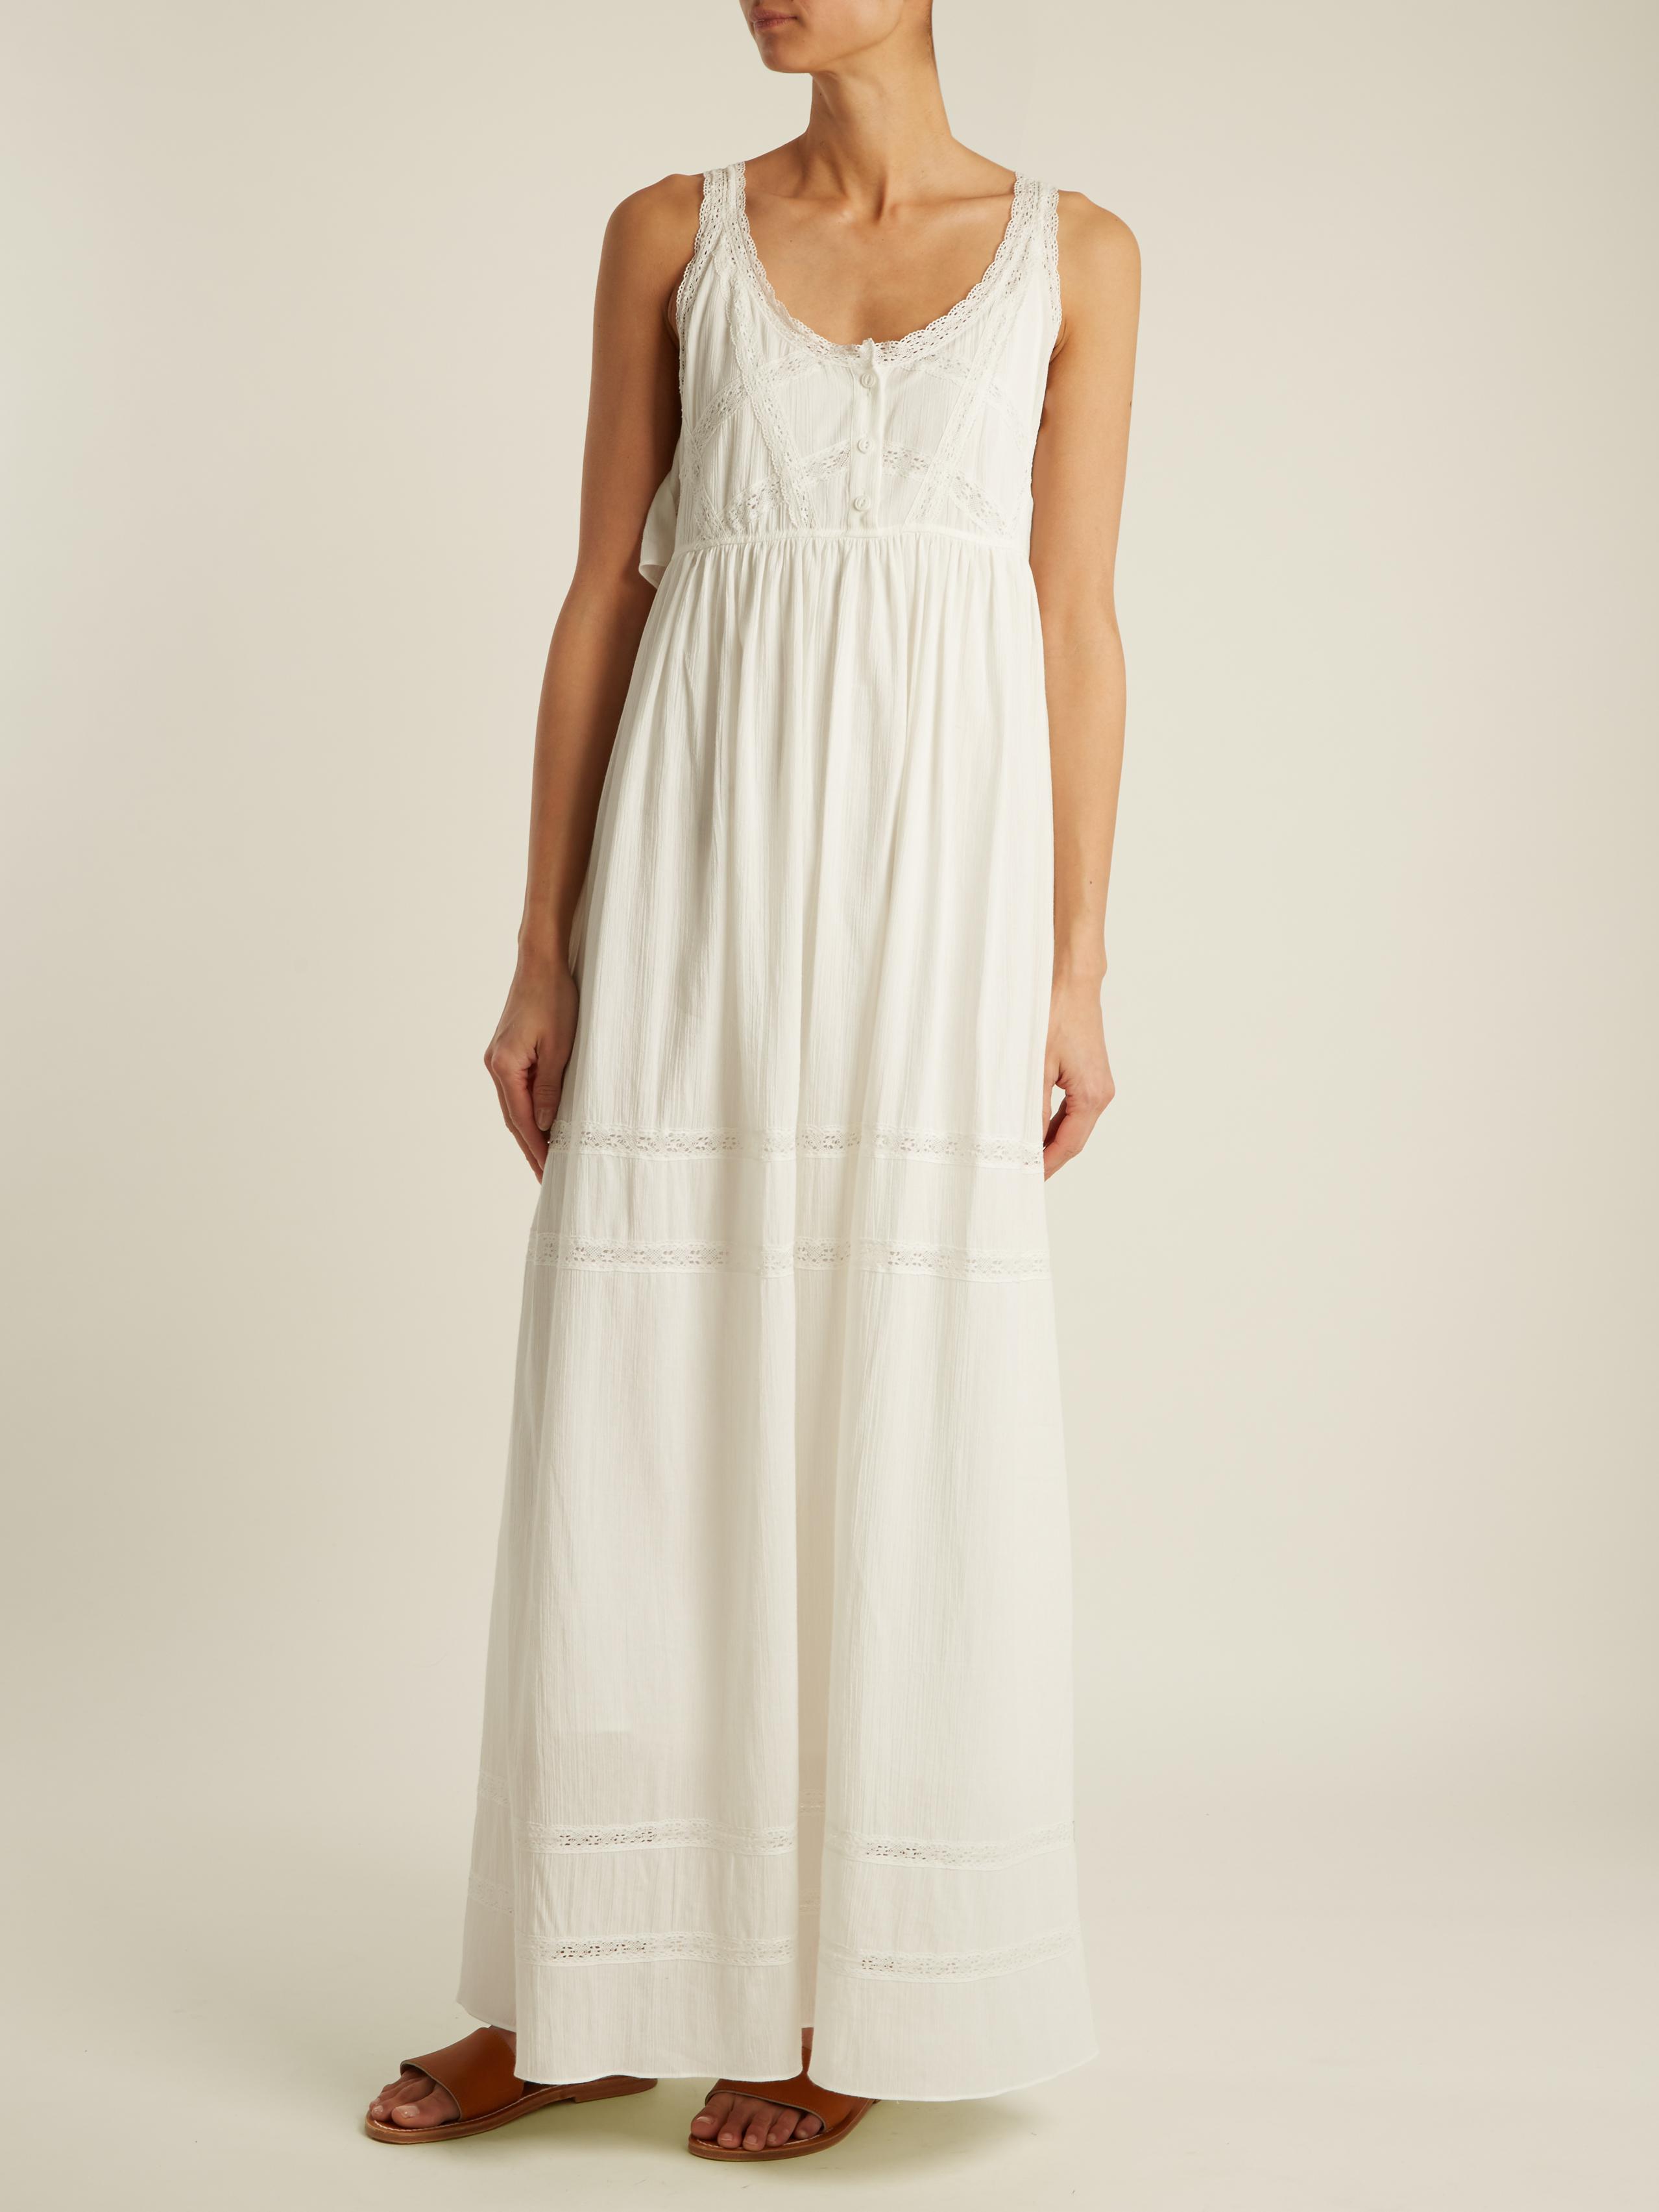 Lyst - Current/Elliott The Lace Cotton Maxi Dress in White